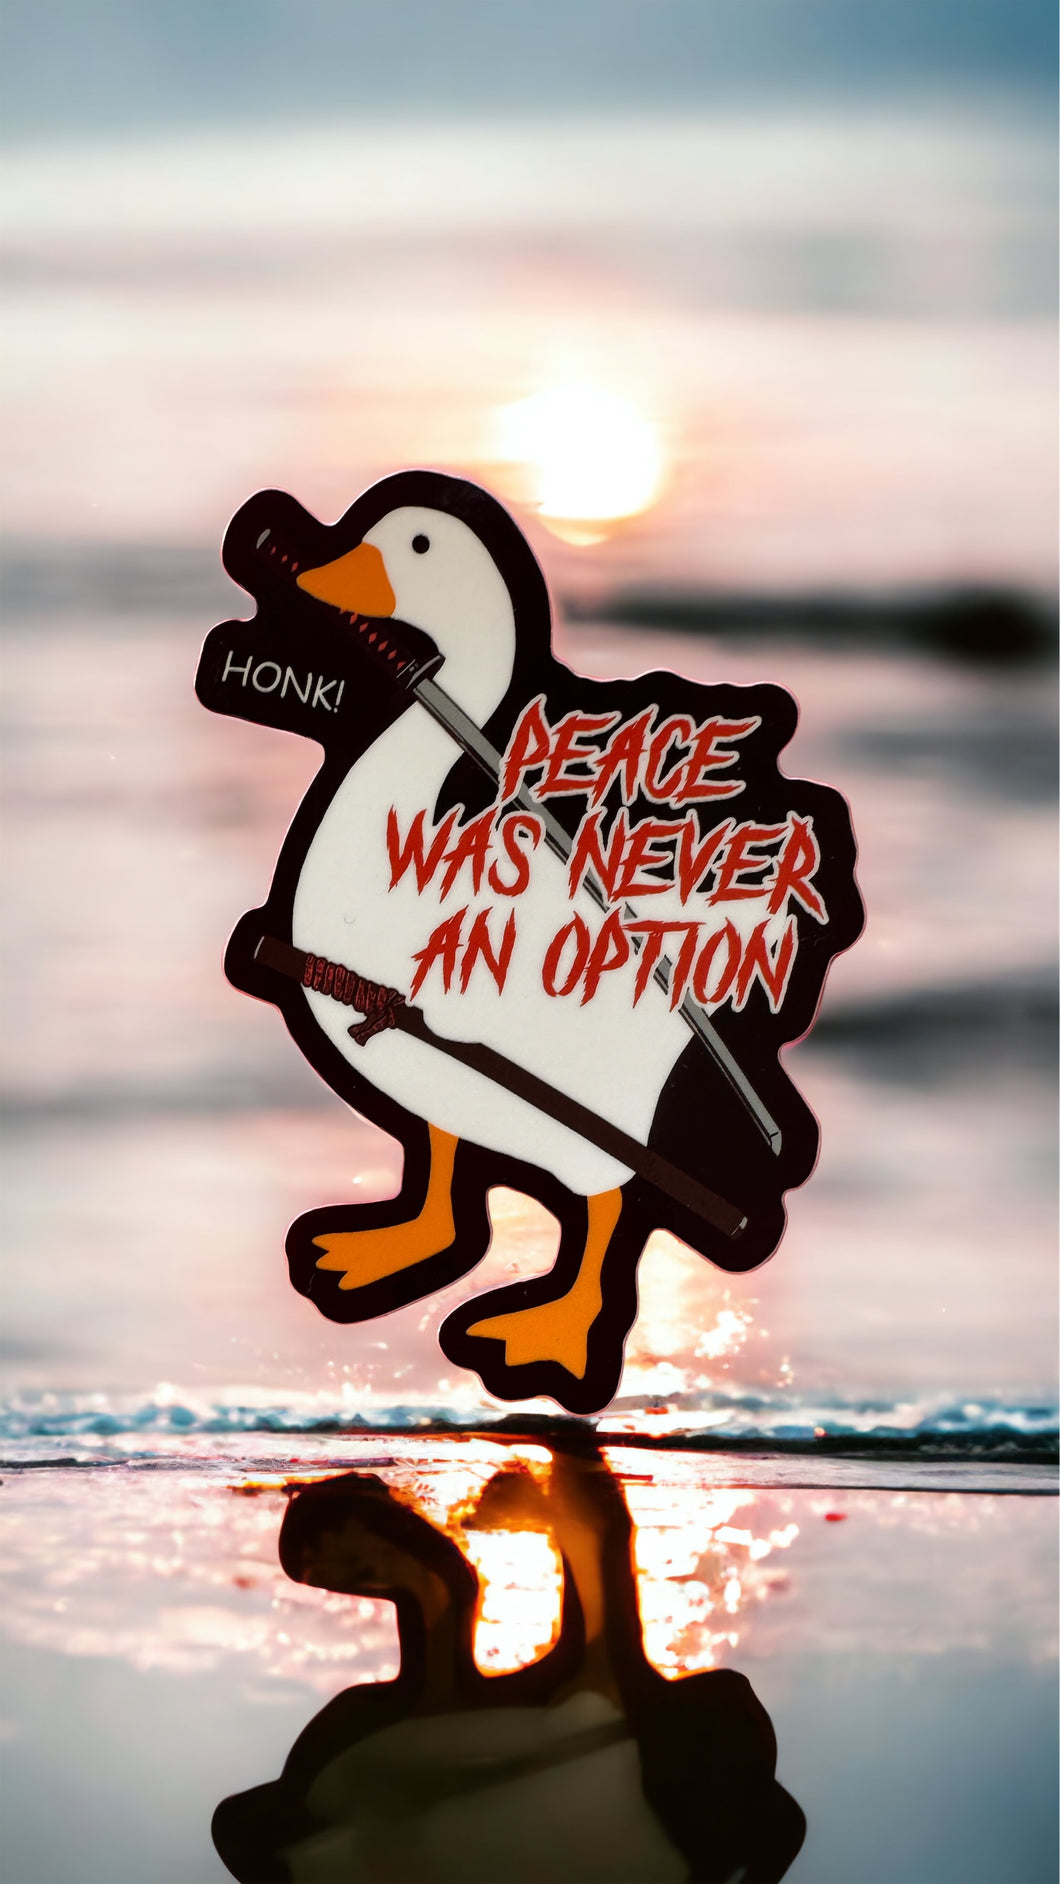 Peace was never an Option! Goose Duck with sword Sticker! - Waterproof vinyl 3 inches